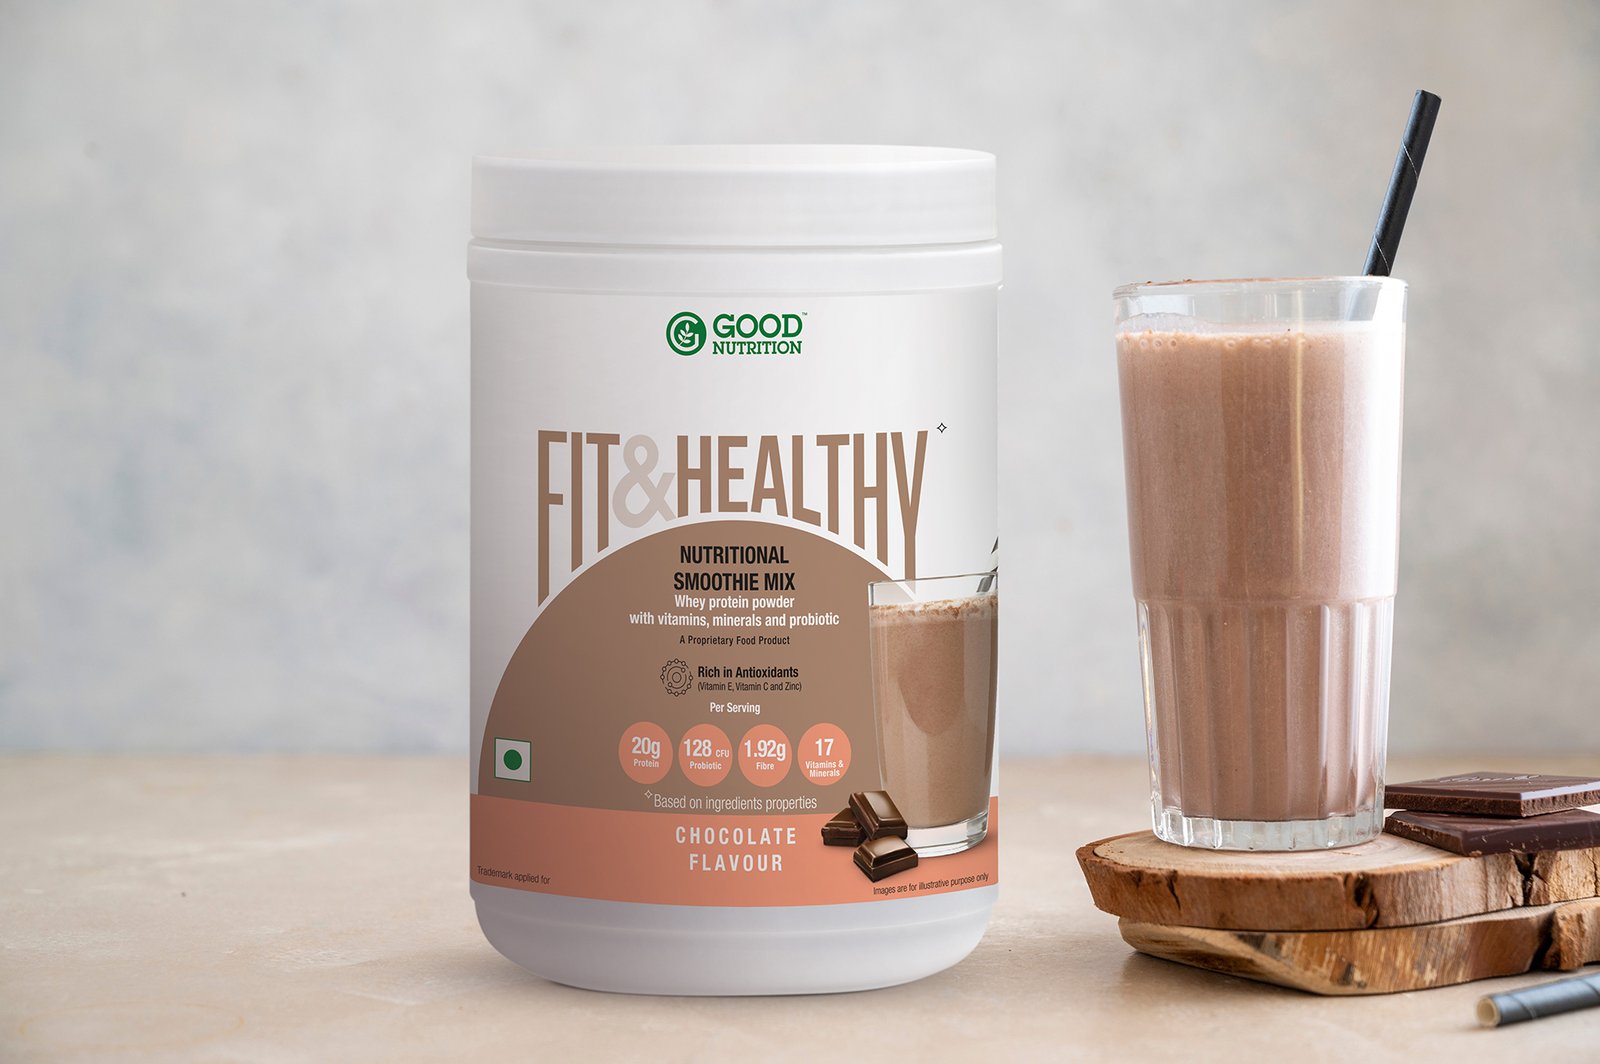 Chocolate protein drink in glass for nutrients and energy, fitness drink